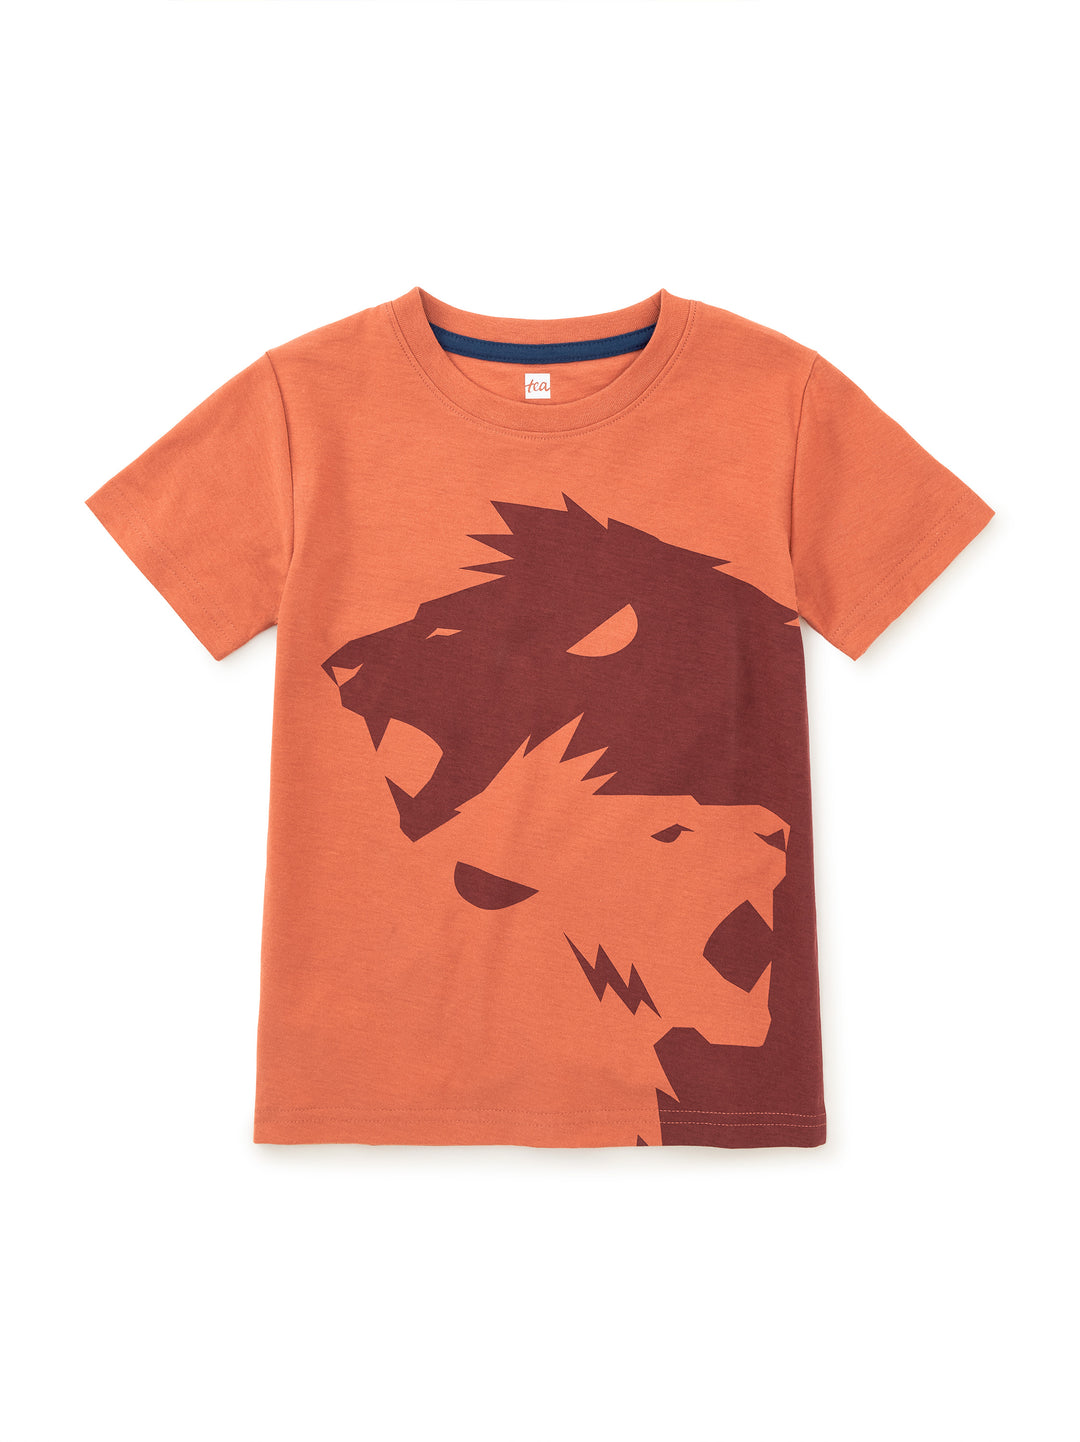 Tea Collection Lion Graphic Tee - Copper